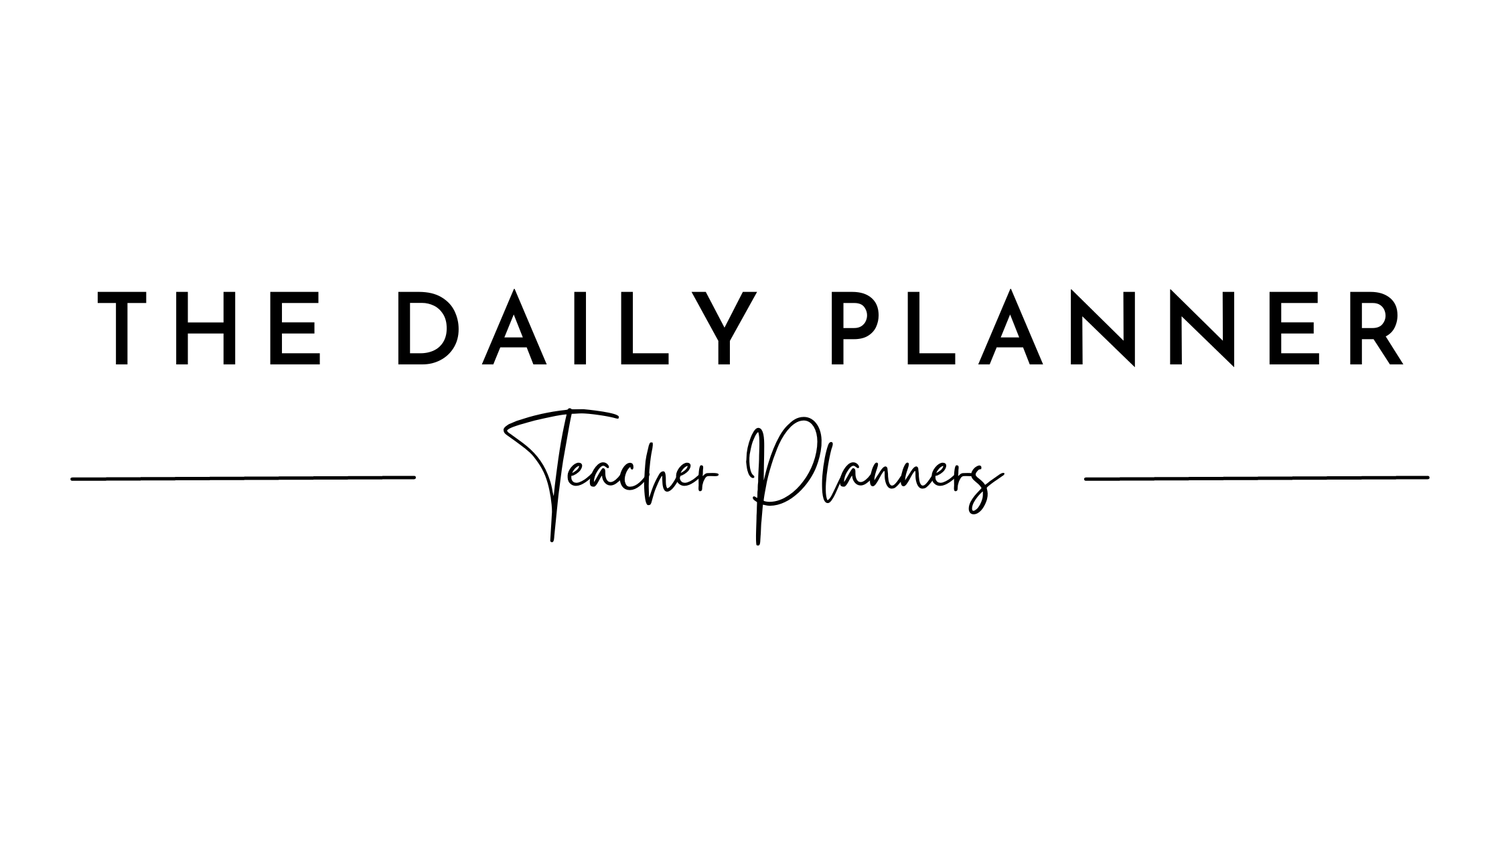 The Daily Planner - Teacher Planners